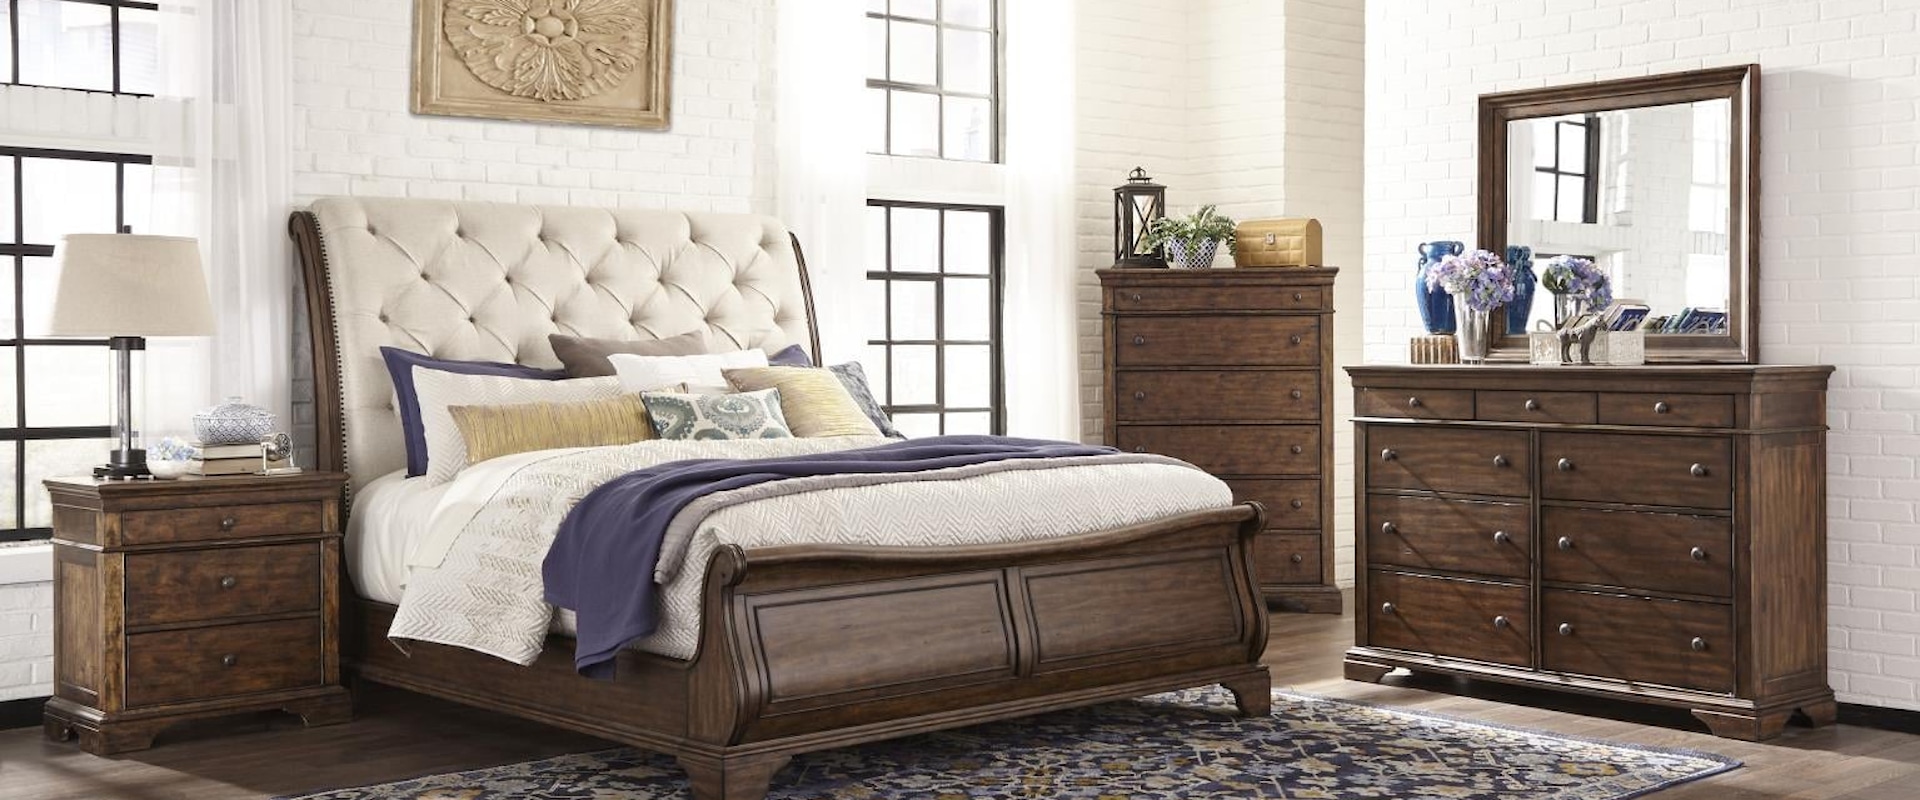 Traditional 5-Piece Bedroom Set with Sleigh Bed